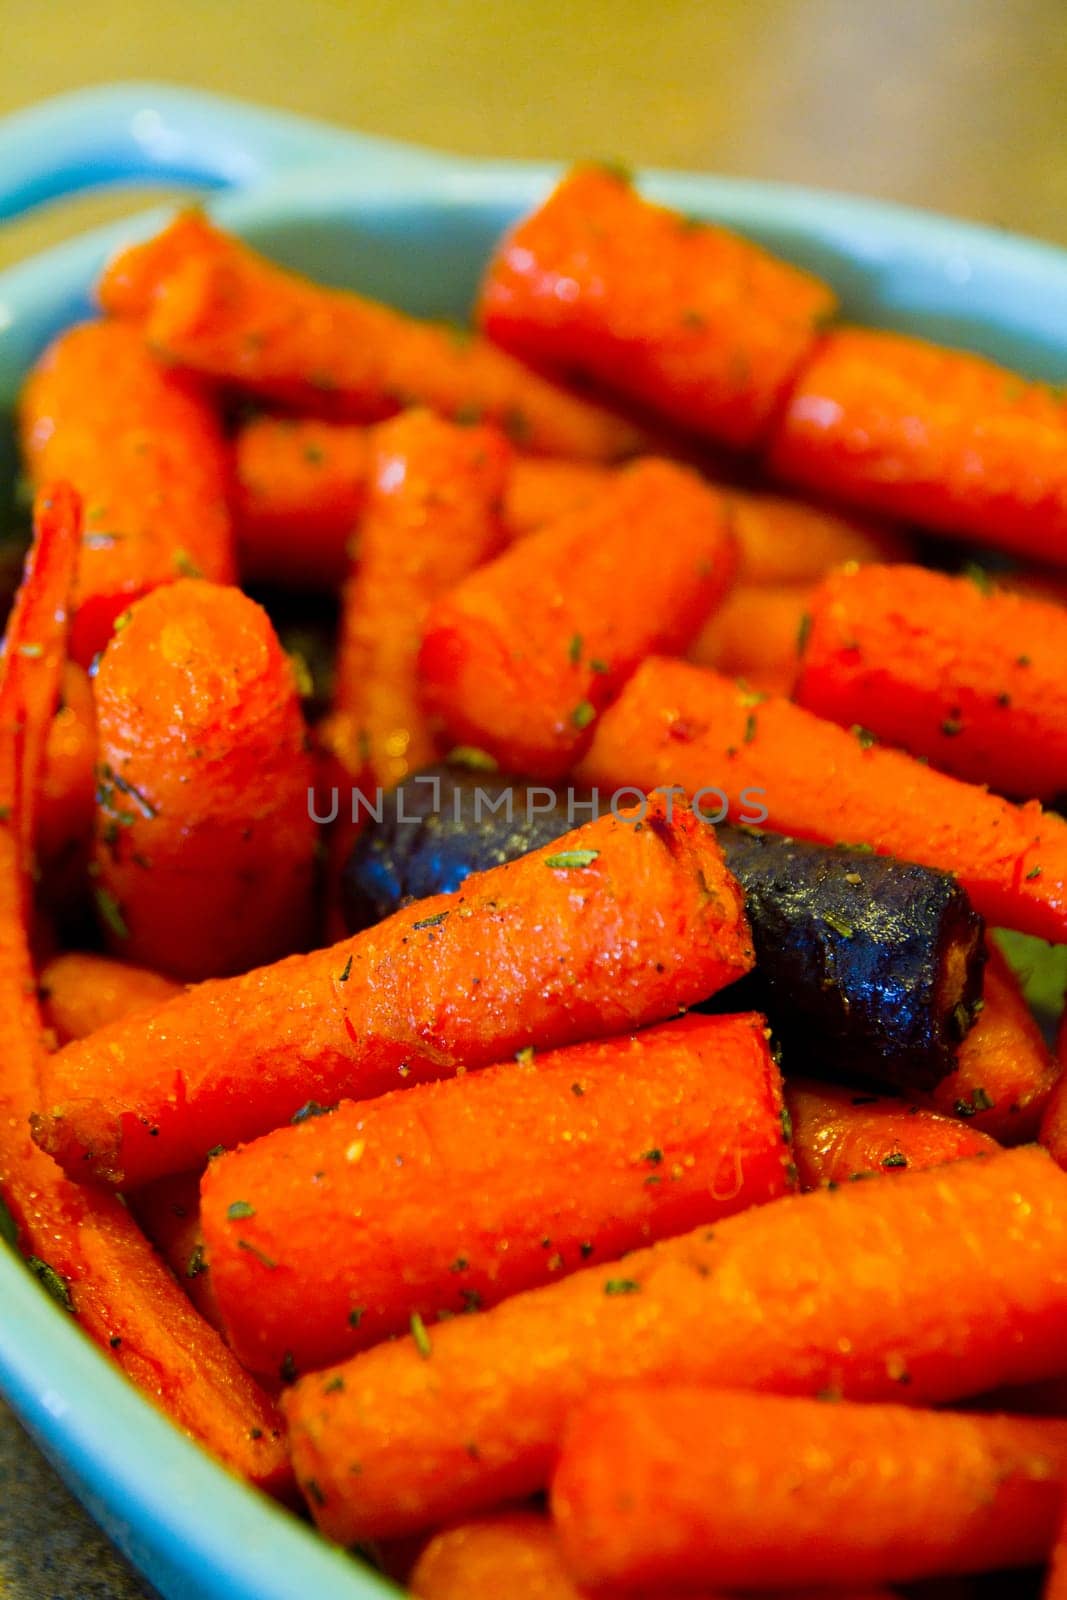 Indulge in the rich flavors of caramelized roasted carrots, served in a vibrant blue ceramic dish. A mouth-watering vegetarian delight from Fort Wayne, Indiana.